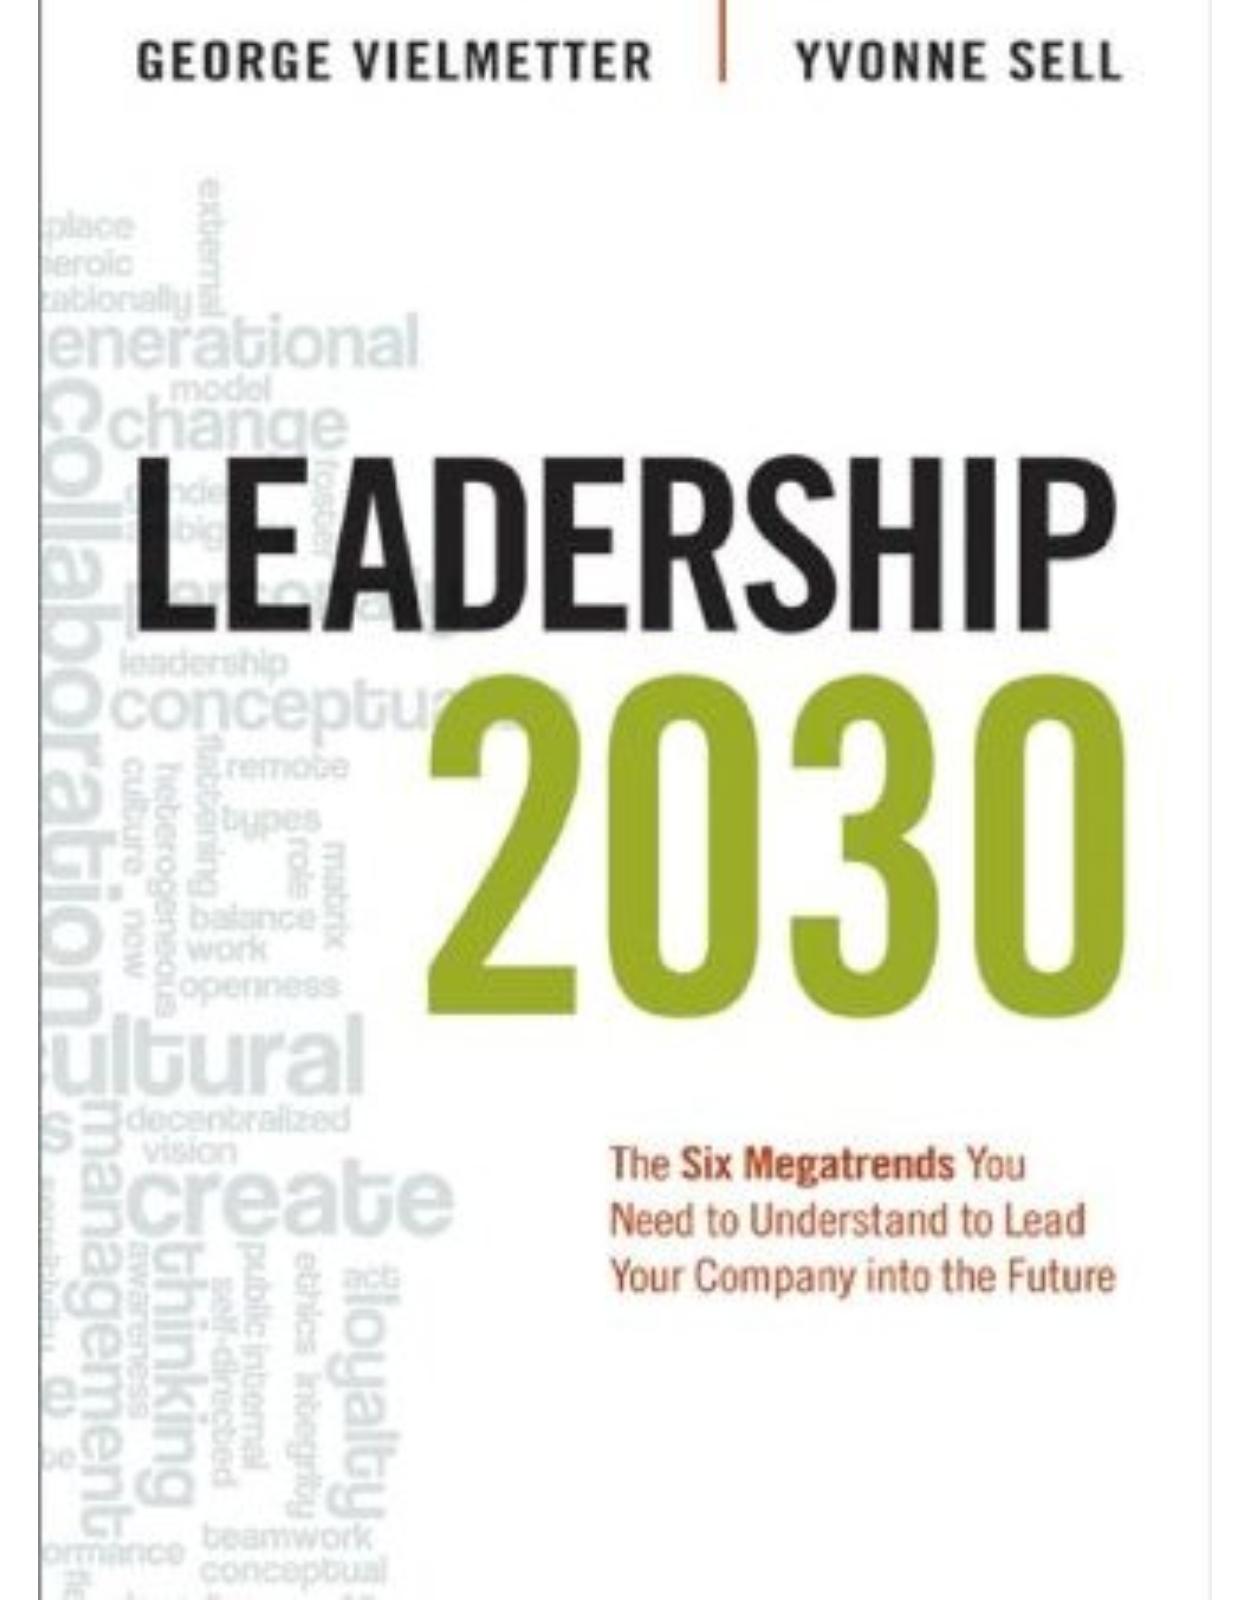 Leadership 2030: The Six Megatrends You Need to Understand to Lead Your Company into the Future